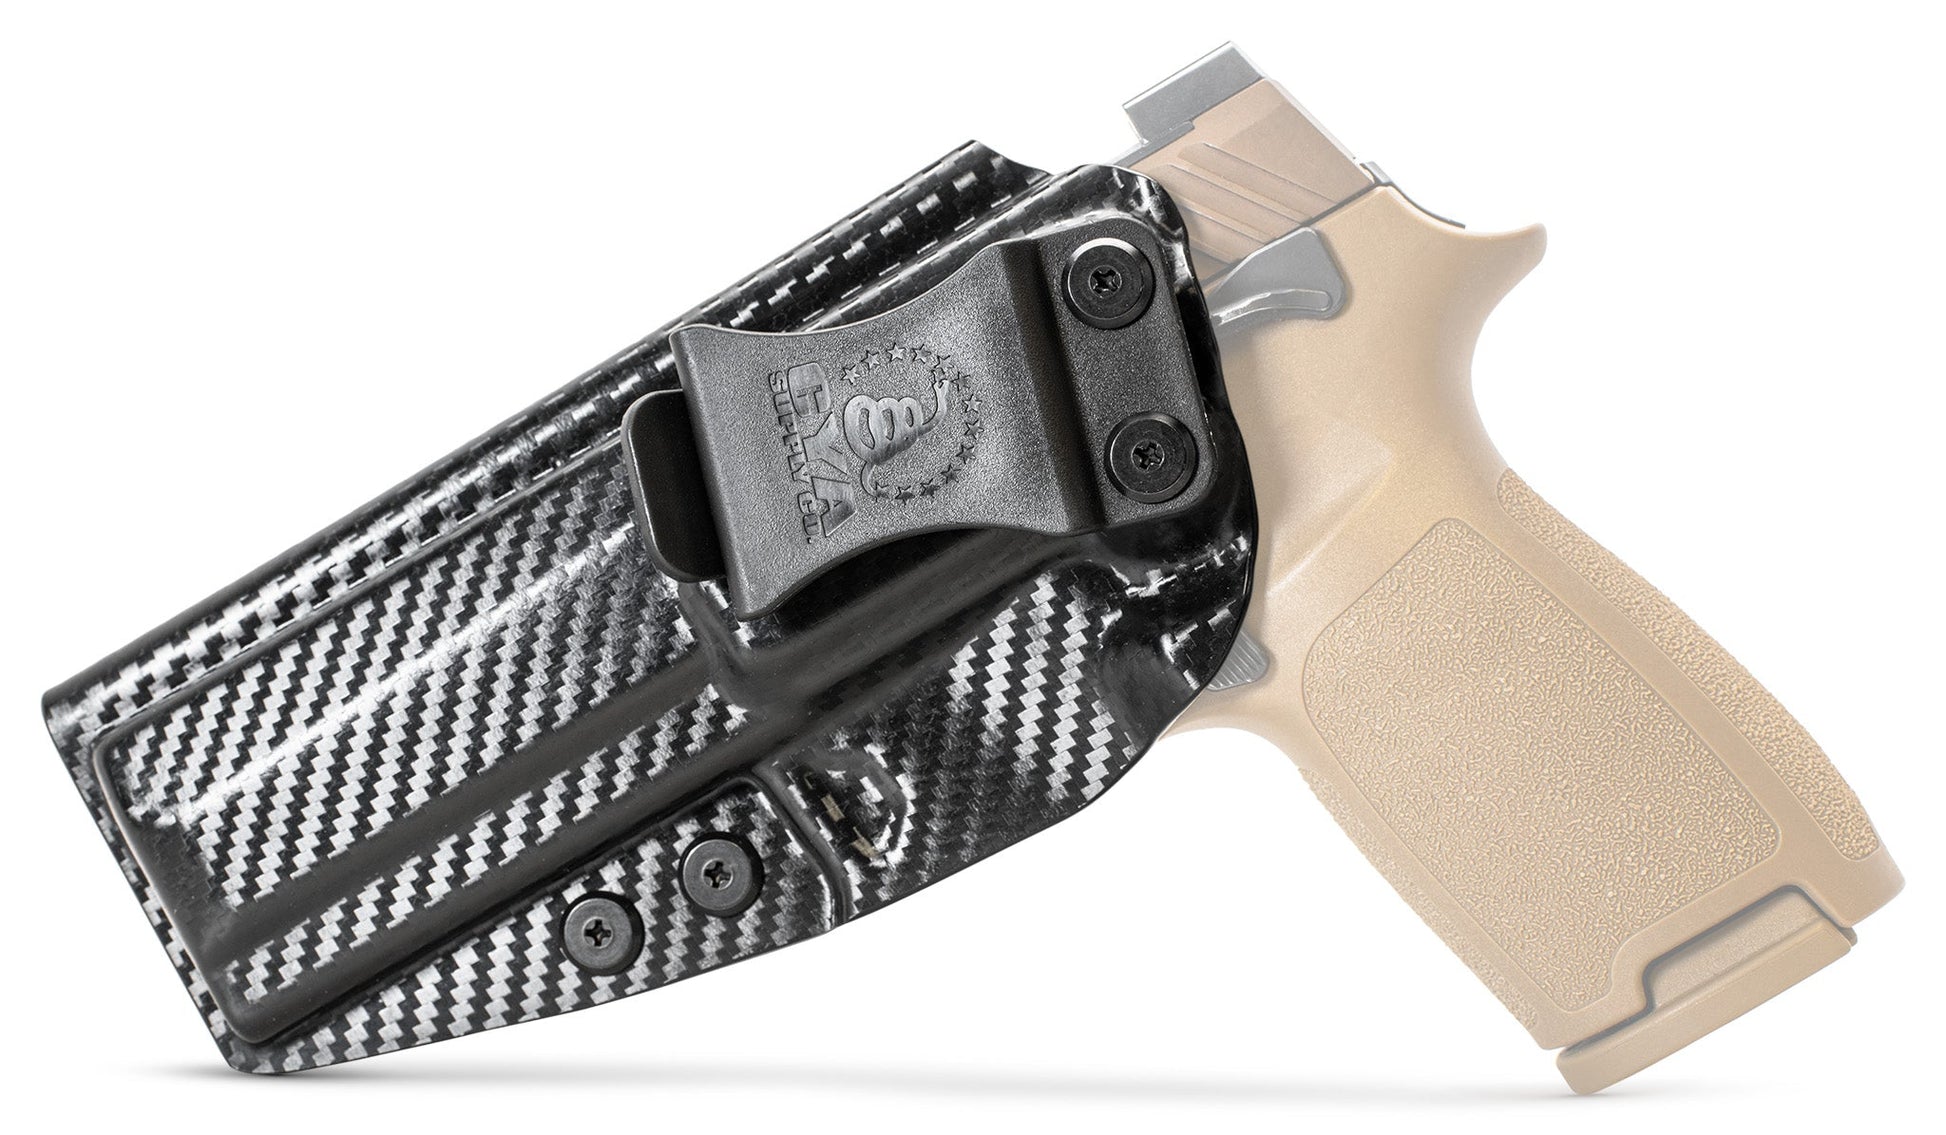 CYA Full size Holster in carbon steel with a black clip on a tan sig sauer p320 handgun